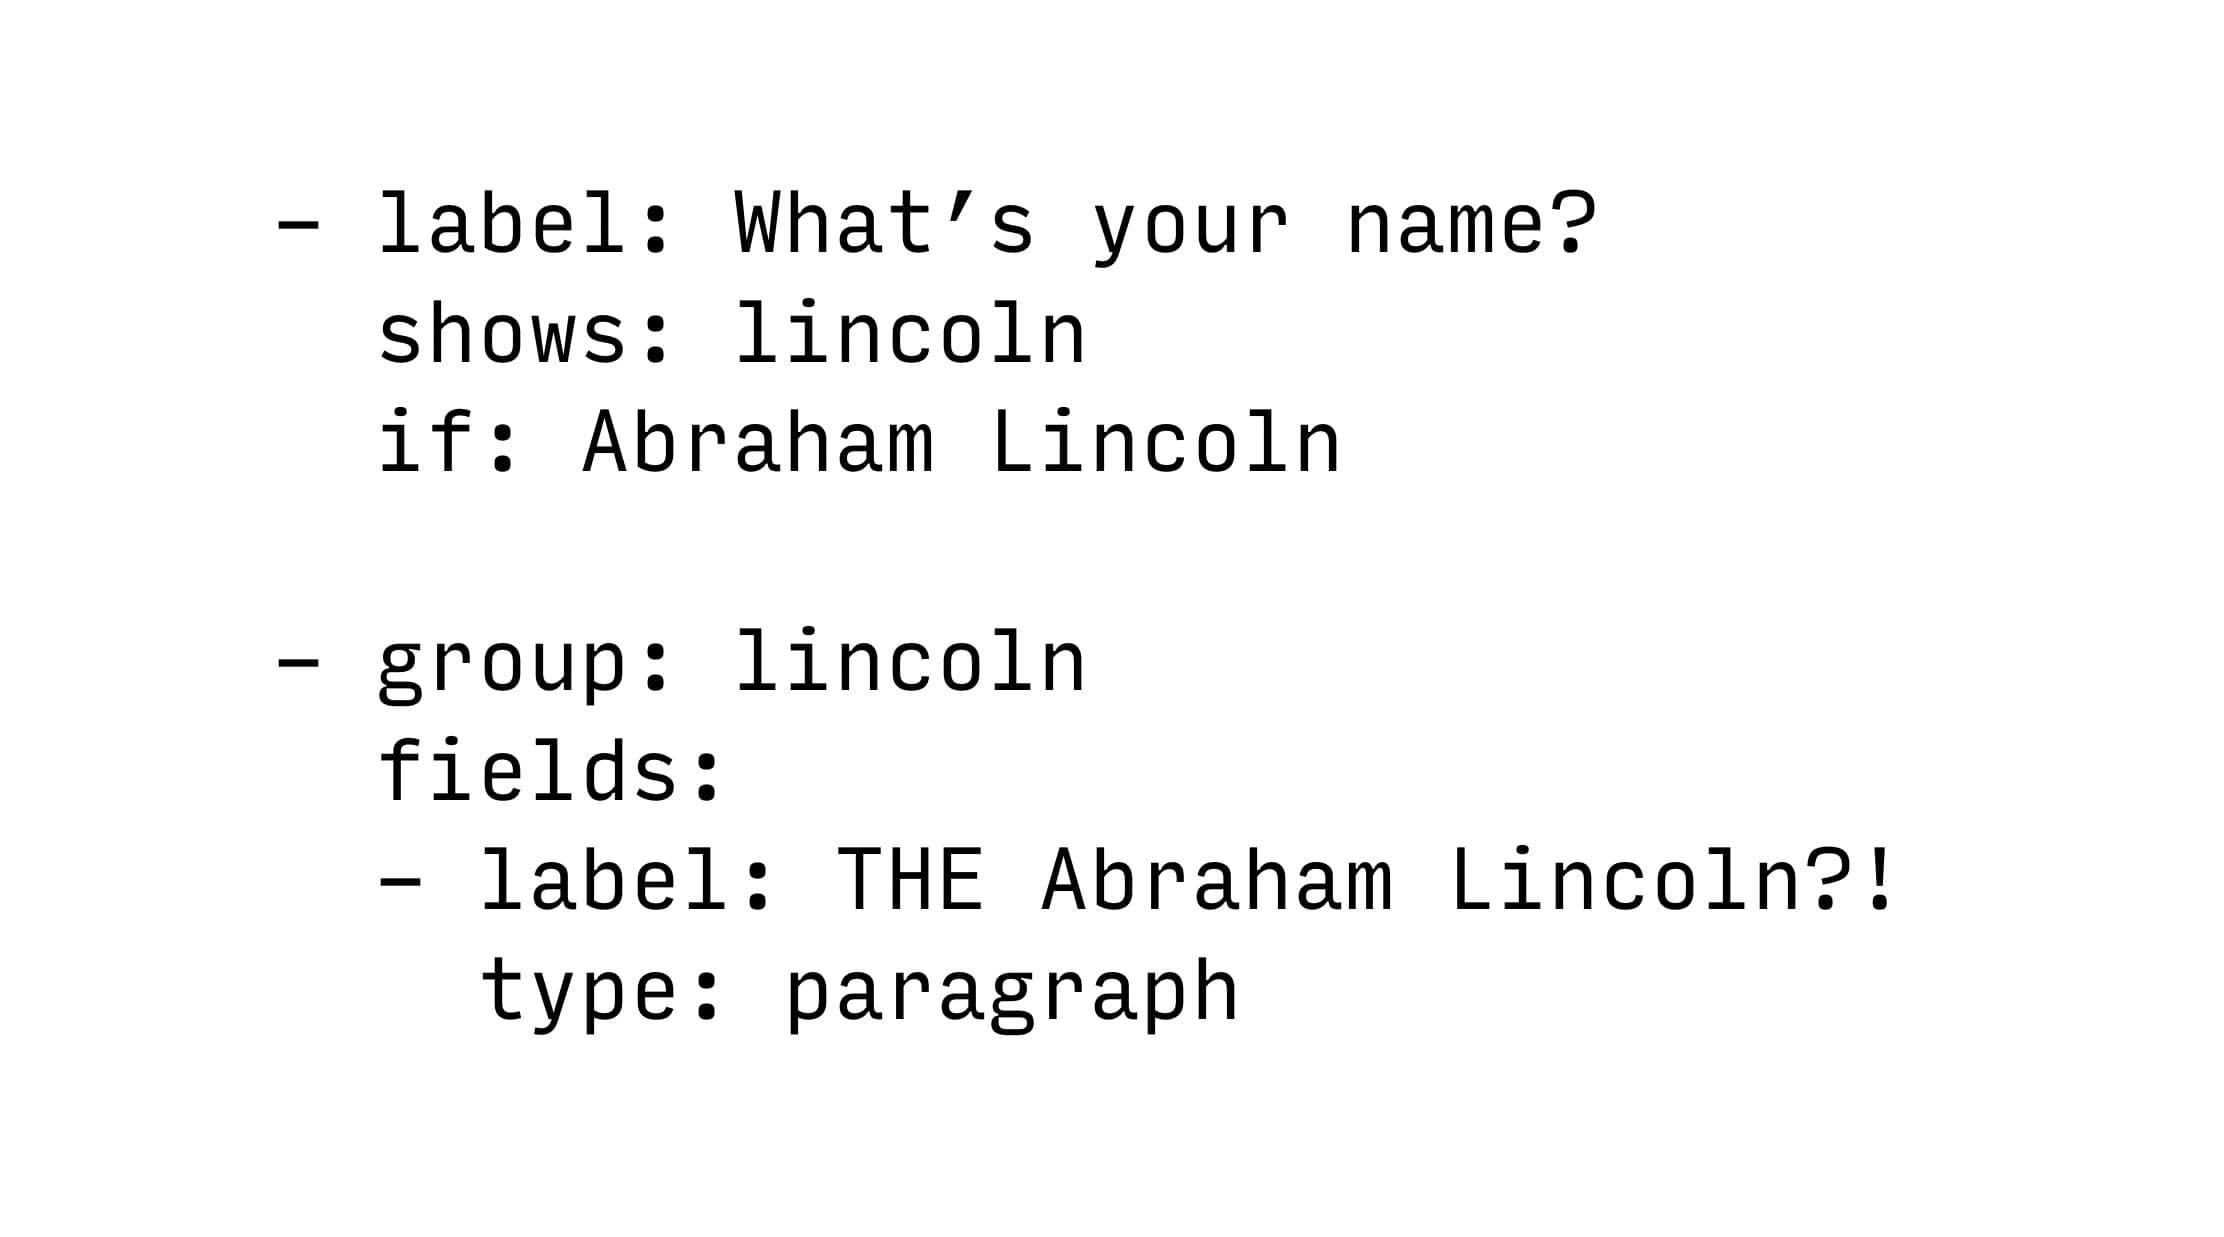 Show 'THE Abraham Lincoln?!' if the answer to 'What is your name?' is 'Abraham Lincoln'